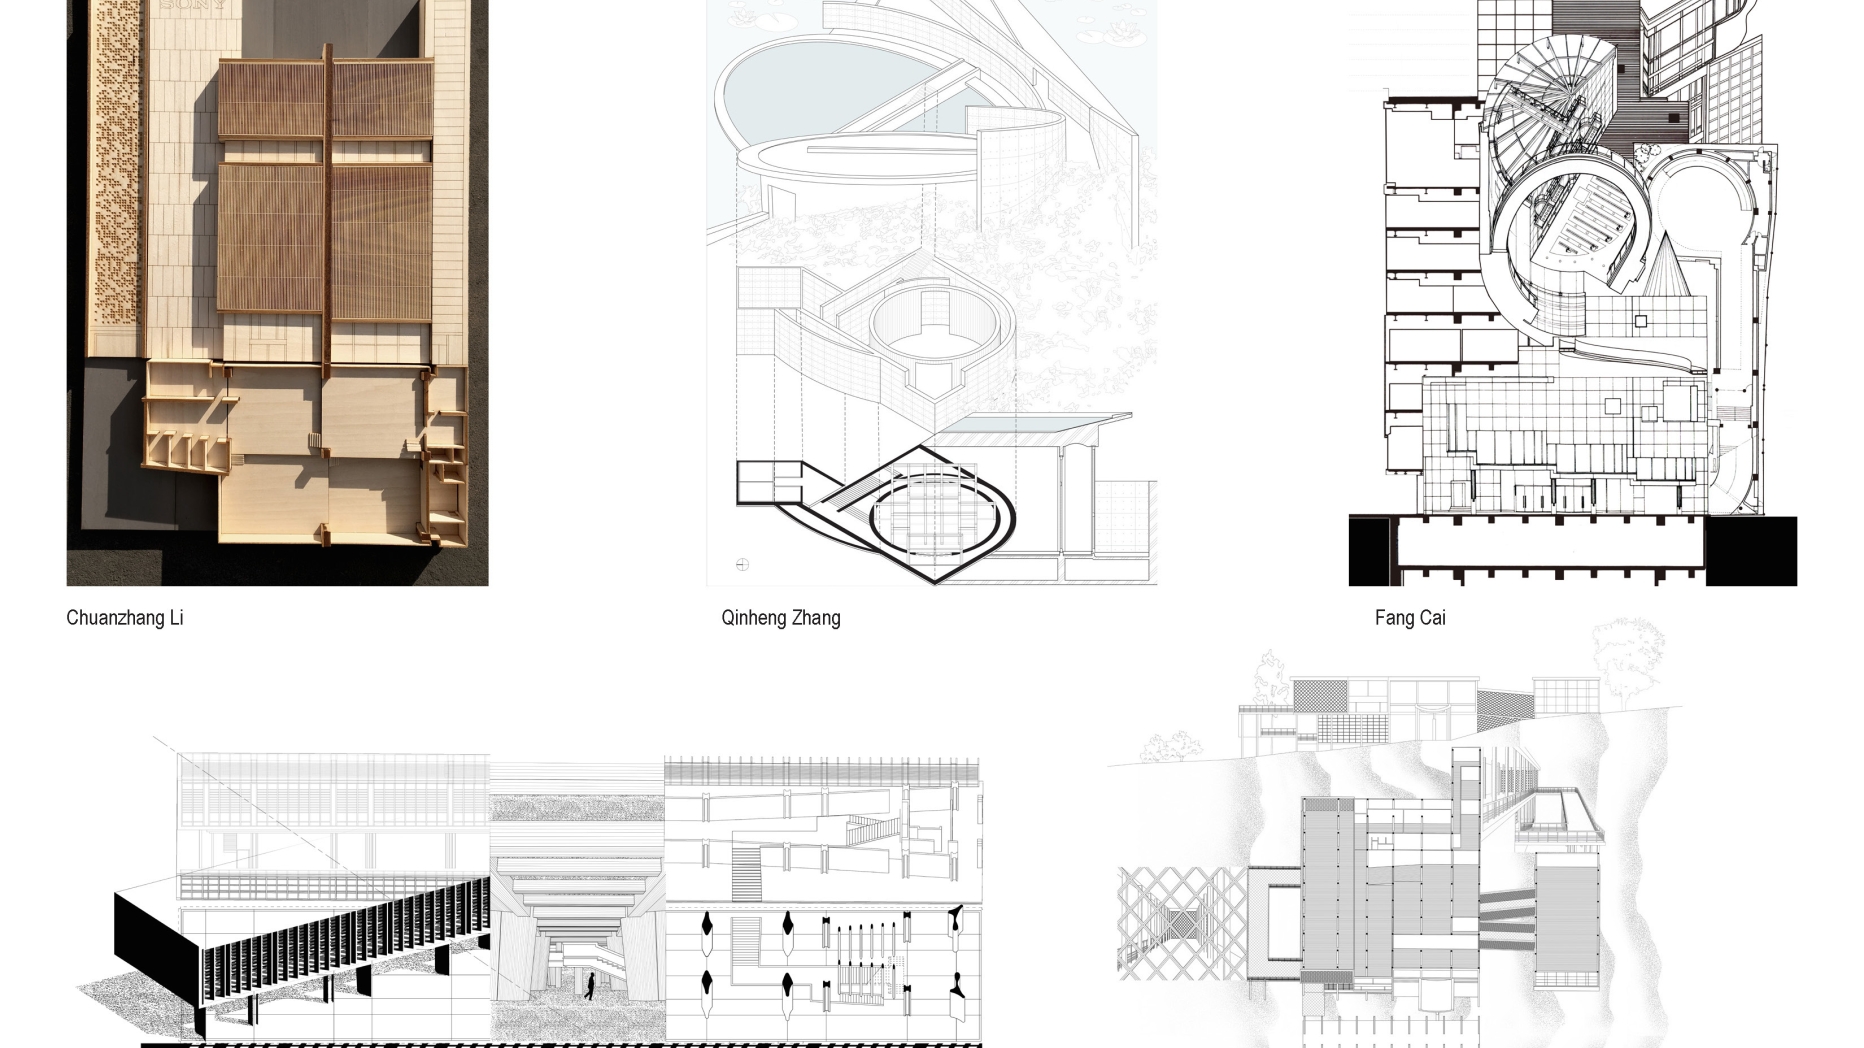 Modern Architecture in Japan - Culture, Climate, Tectonics, 2015 - Students' analytical drawings